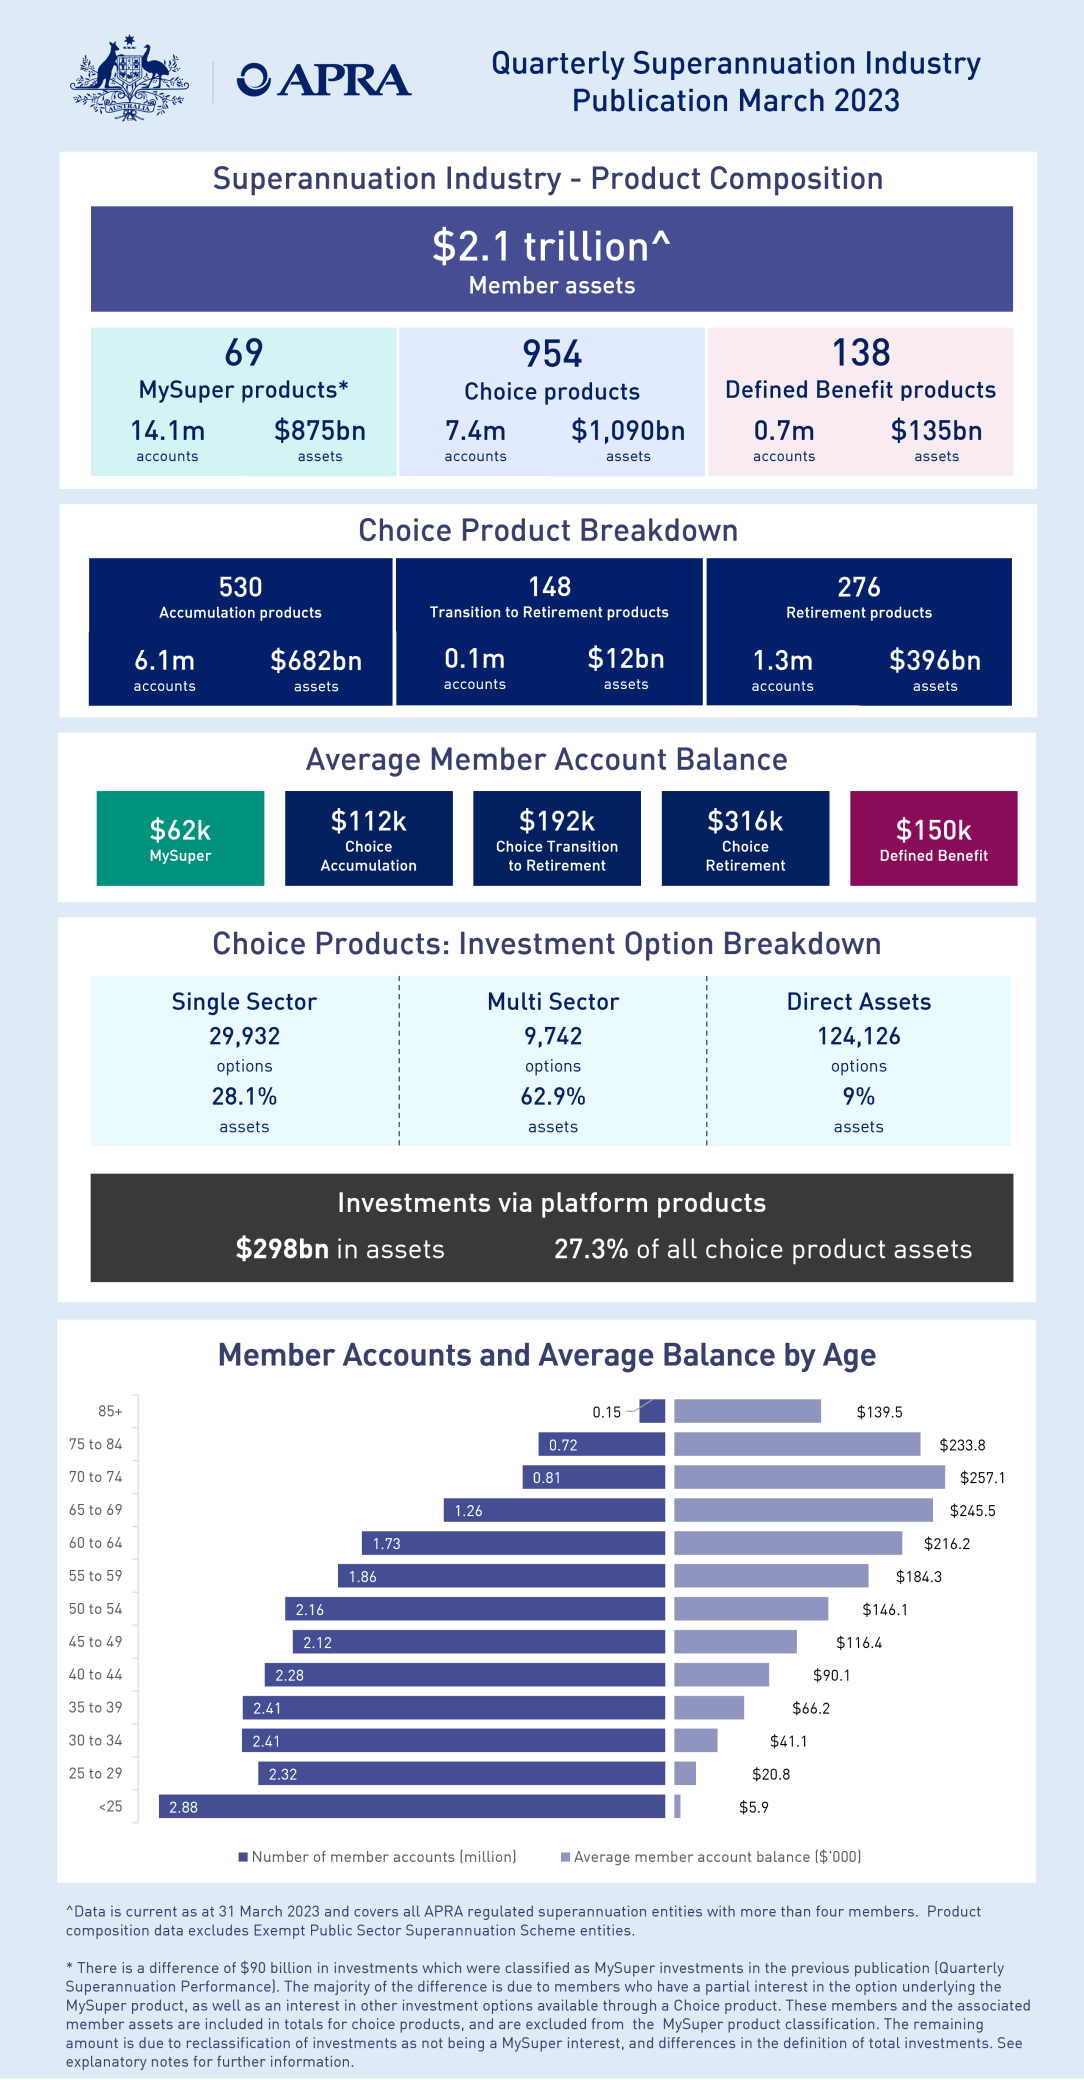 an accessible version of this dashboard is available at: https://www.apra.gov.au/infographic-quarterly-superannuation-industry-publication-june-2022-accessible-version